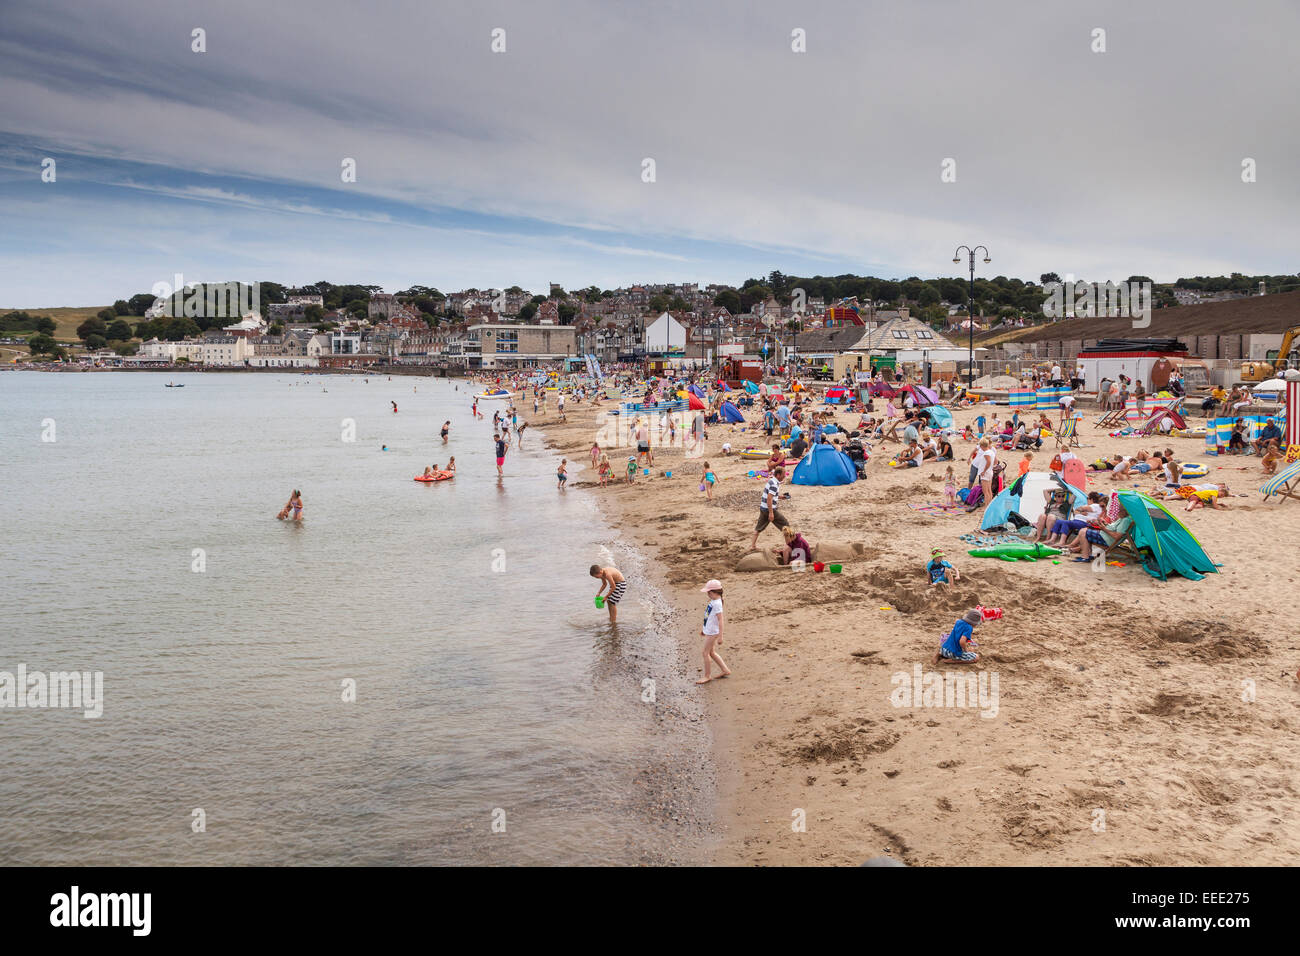 The beach at Swanage in Dorset. Stock Photo